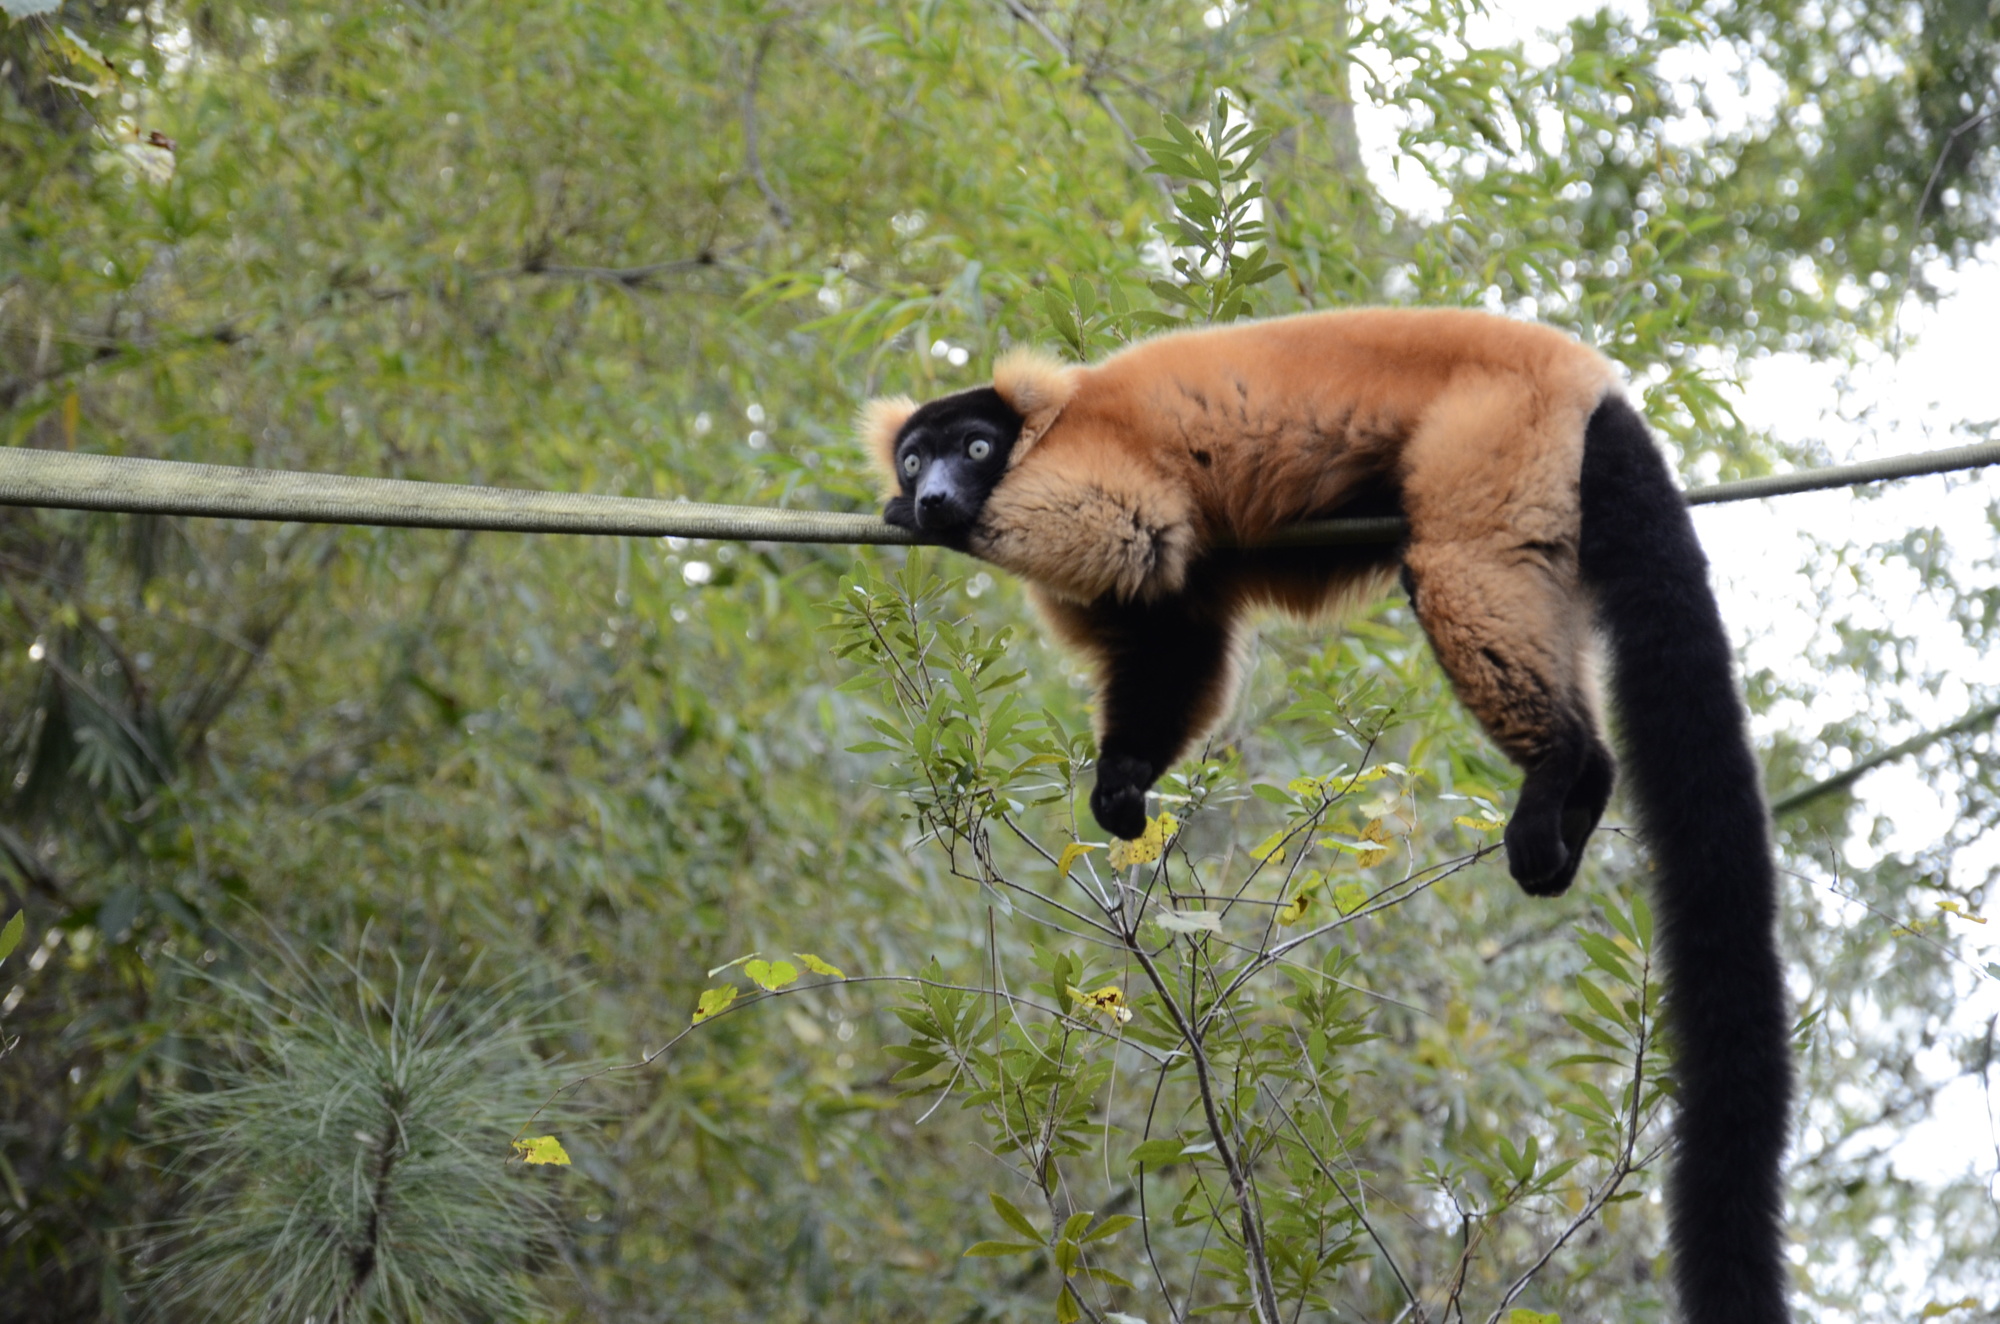 A red ruffed lemur chills out on a rope walk.